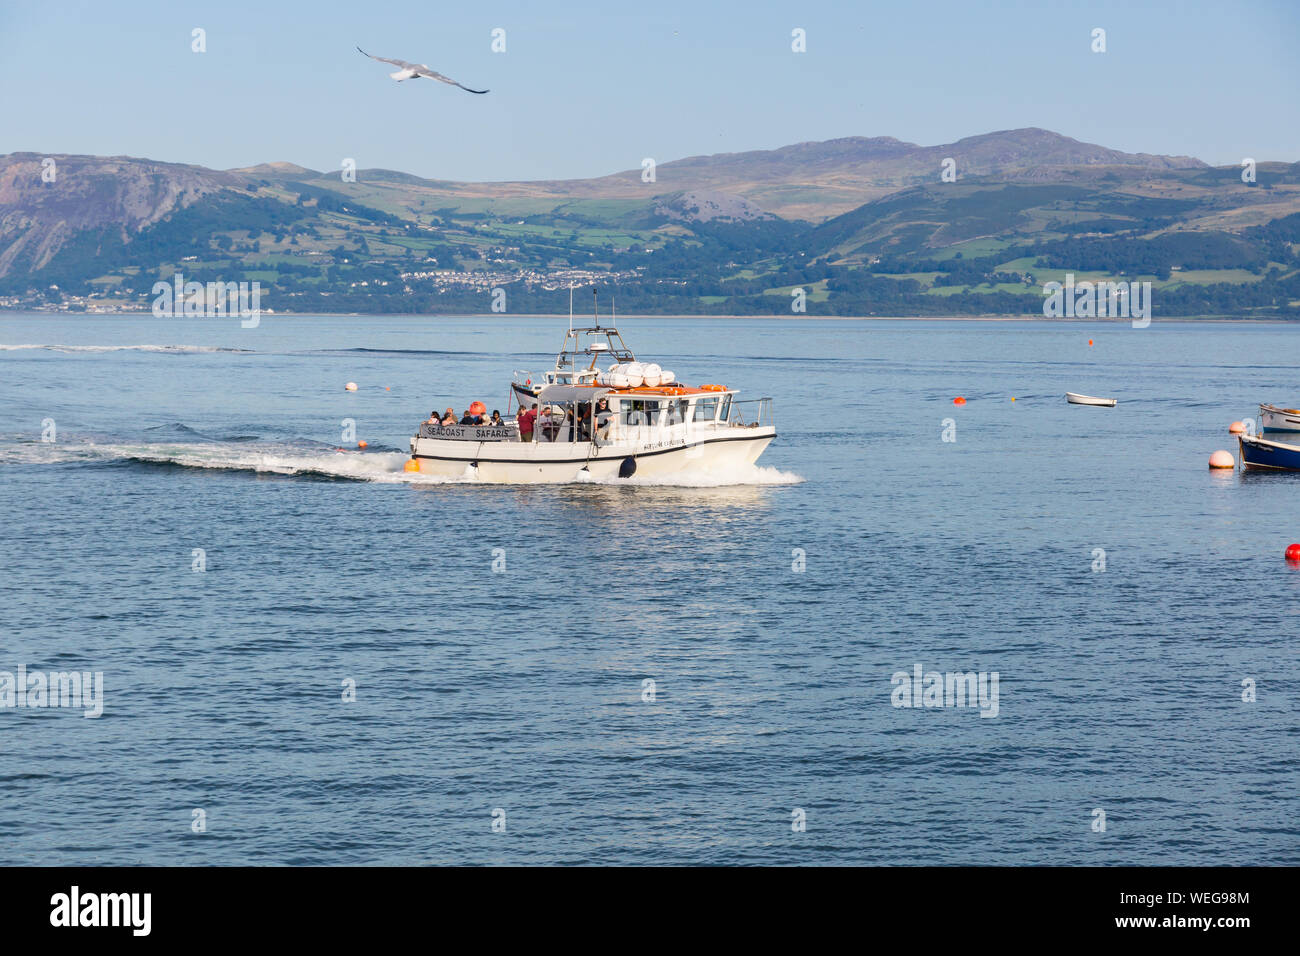 Seacoast Safaris boat Neptune Explorer off the coast of Anglesey at Penmon Point taking tourists on a cruise from Beaumaris to Puffin Island in Wales Stock Photo